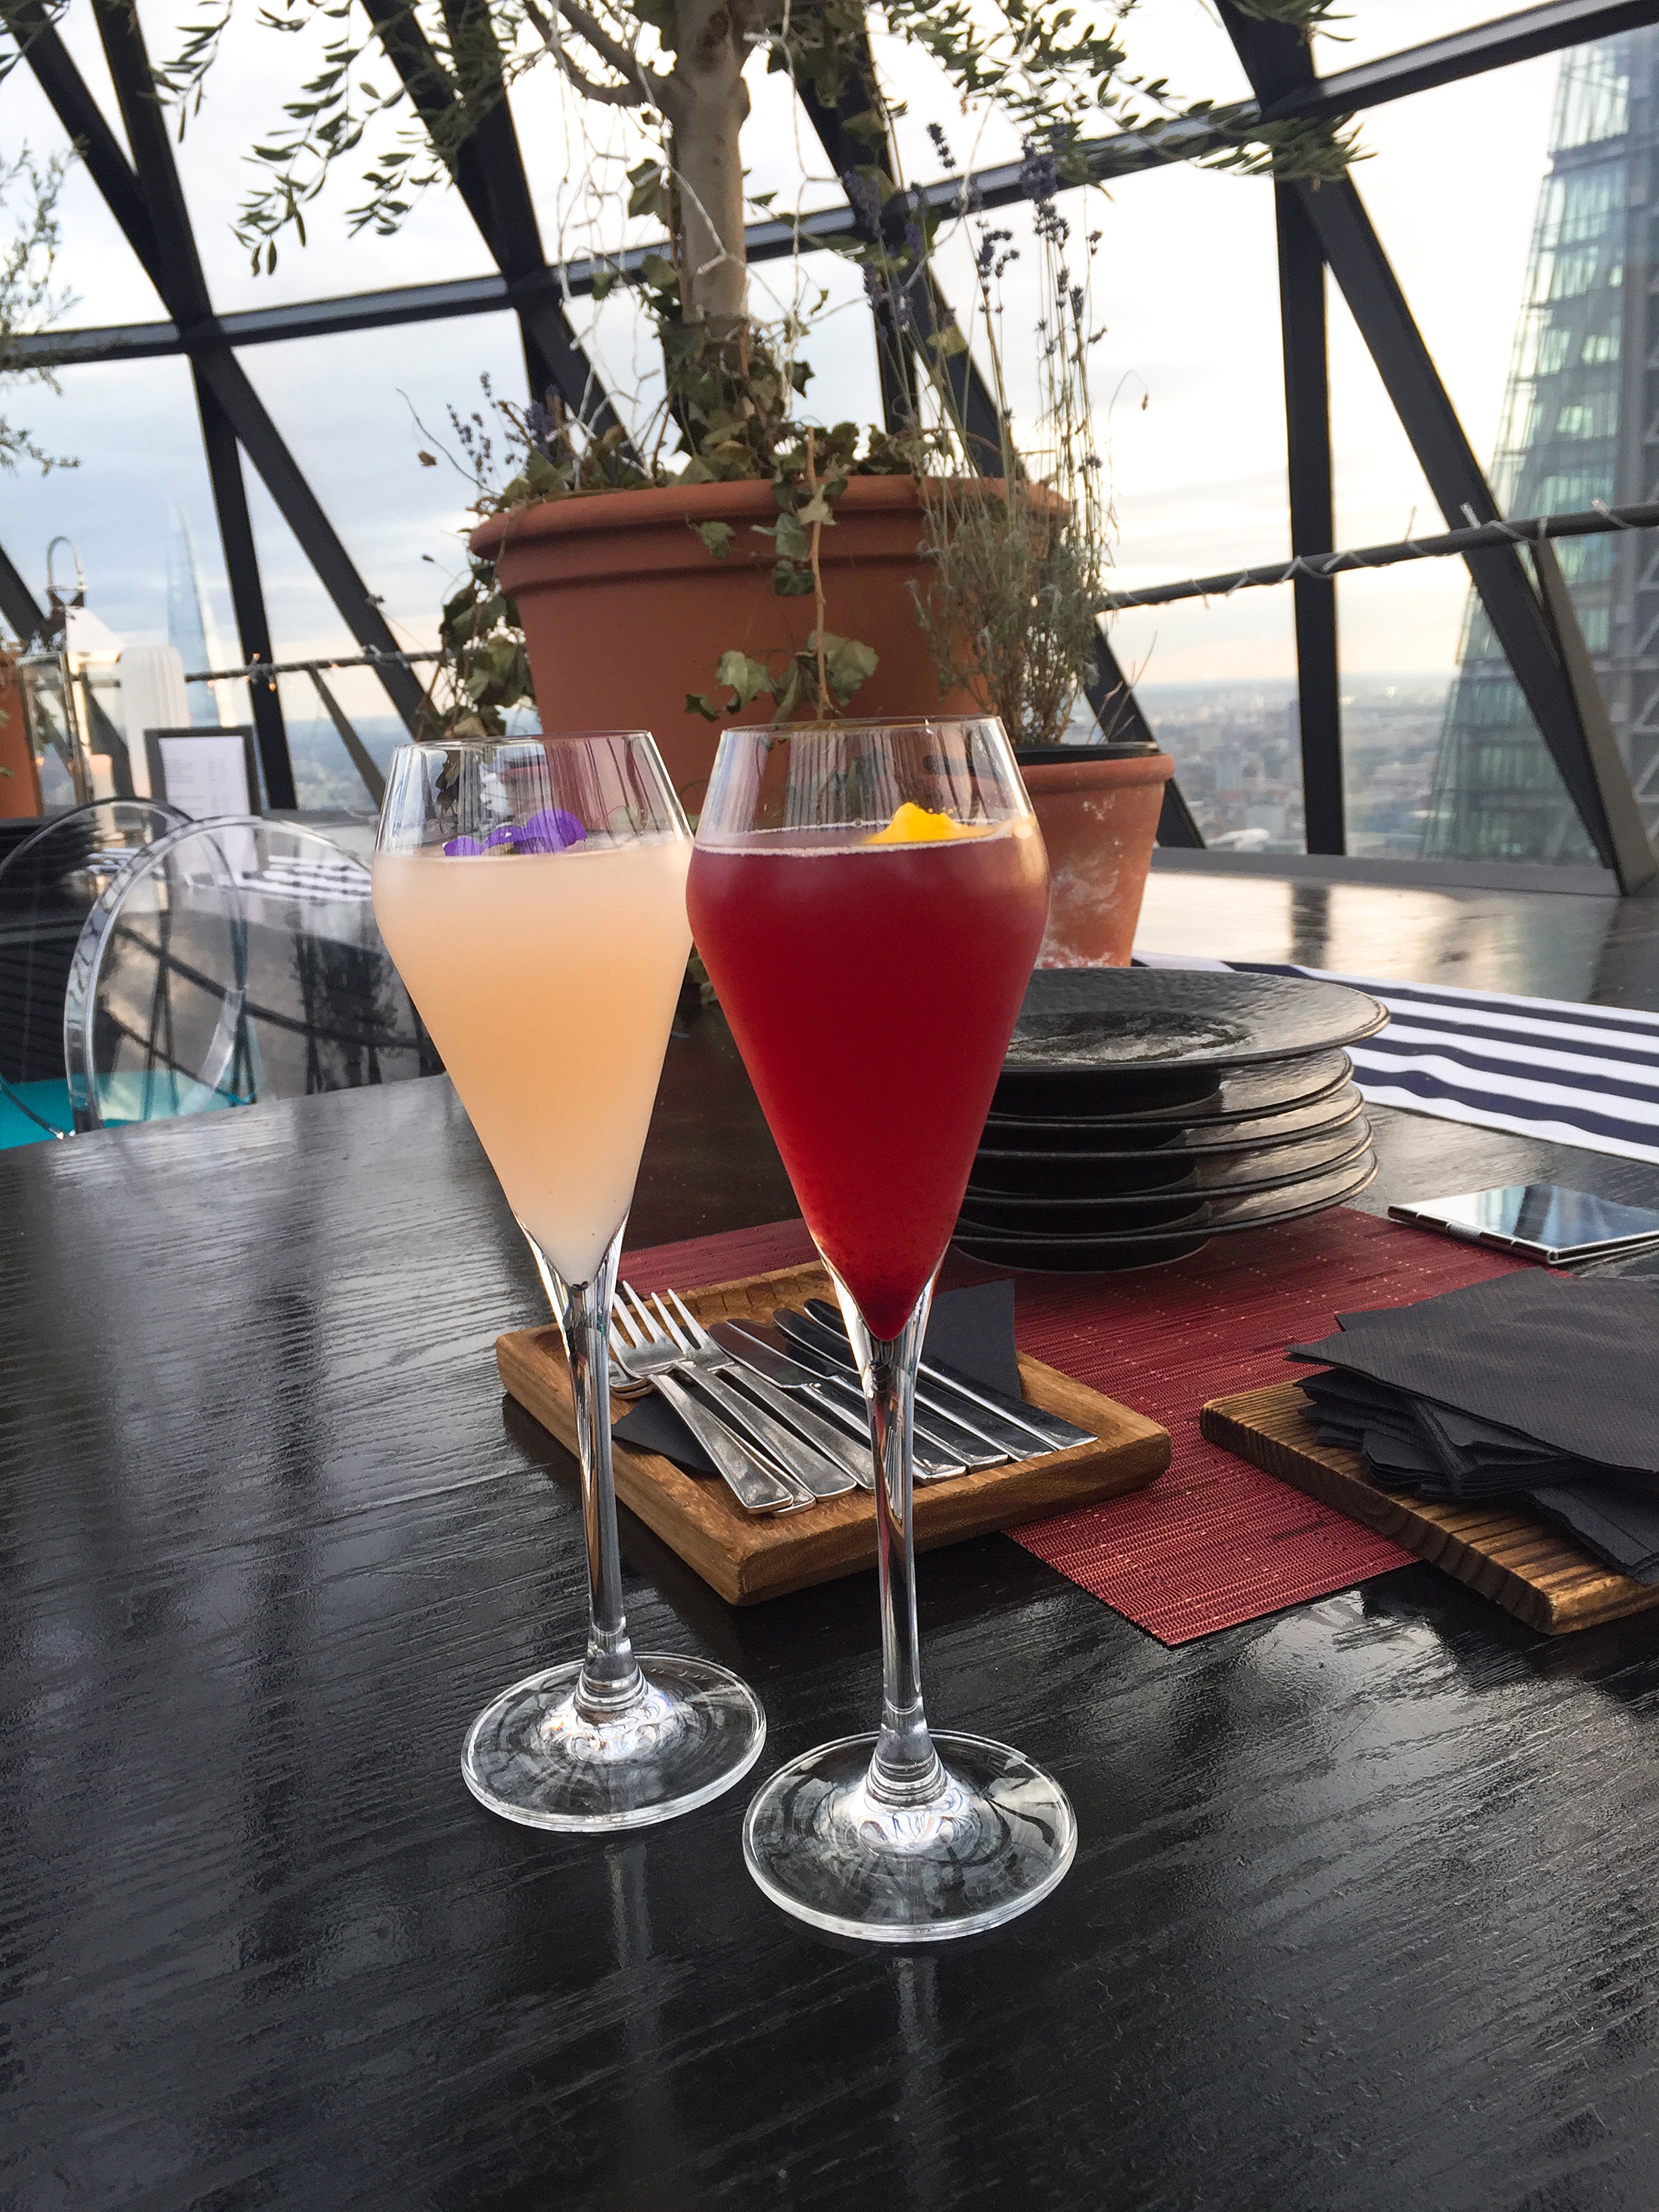 Cocktails - Summer Sky Riviera, Searcys at The Gherkin